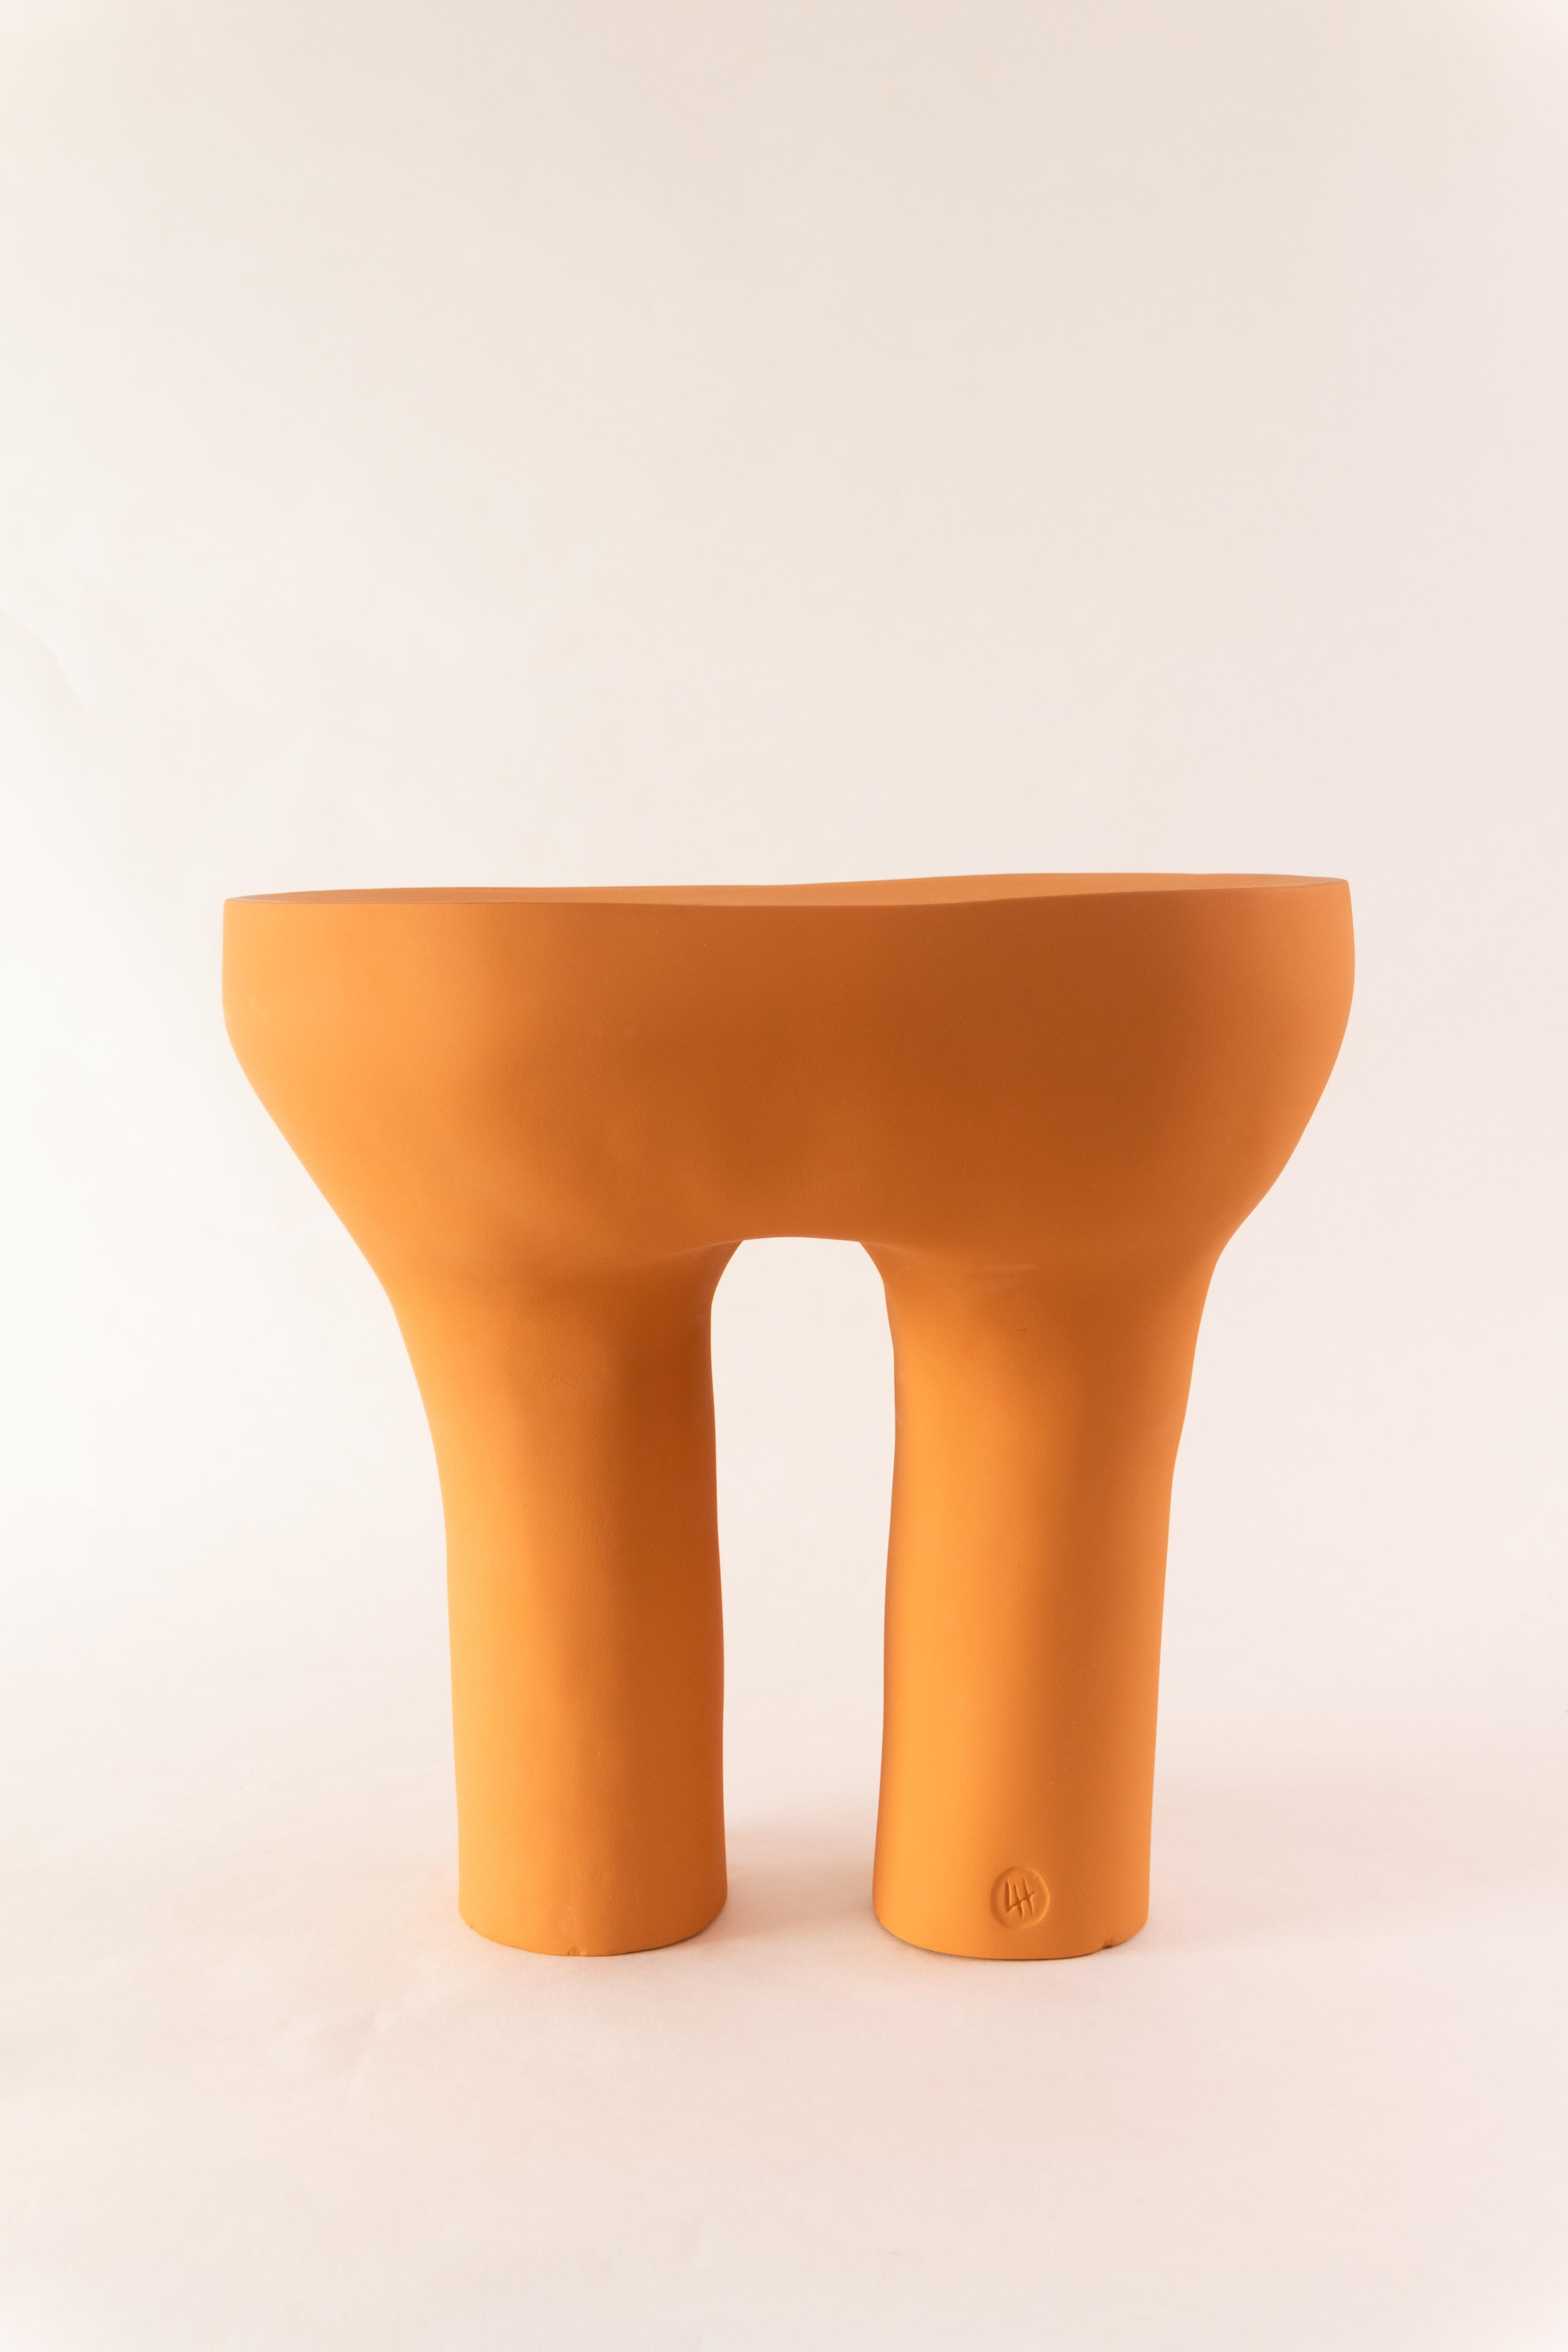 High Arca side table by Lucas Huillet
Dimensions: D 40 x W 30 x H 40 cm.
Materials: Grogged terracotta.
Weight: 15 kg.
Available in other sizes. 

Lucas Huillet is an artisan designer.
He bases his practice around the cross-disciplinarity